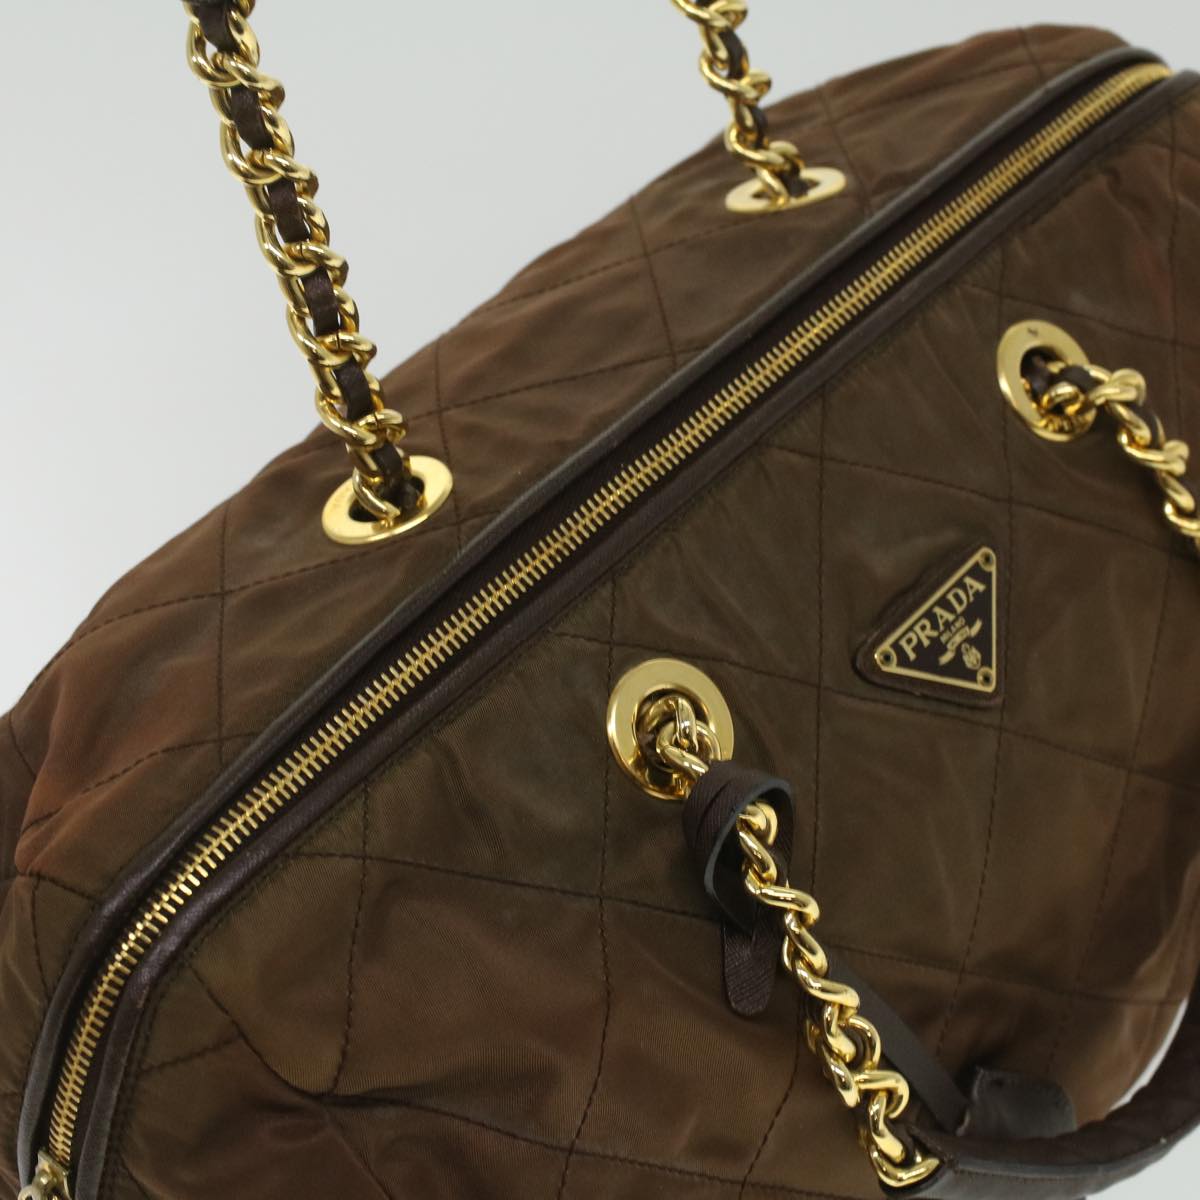 PRADA Quilted Chain Hand Bag Nylon Brown Auth 36963